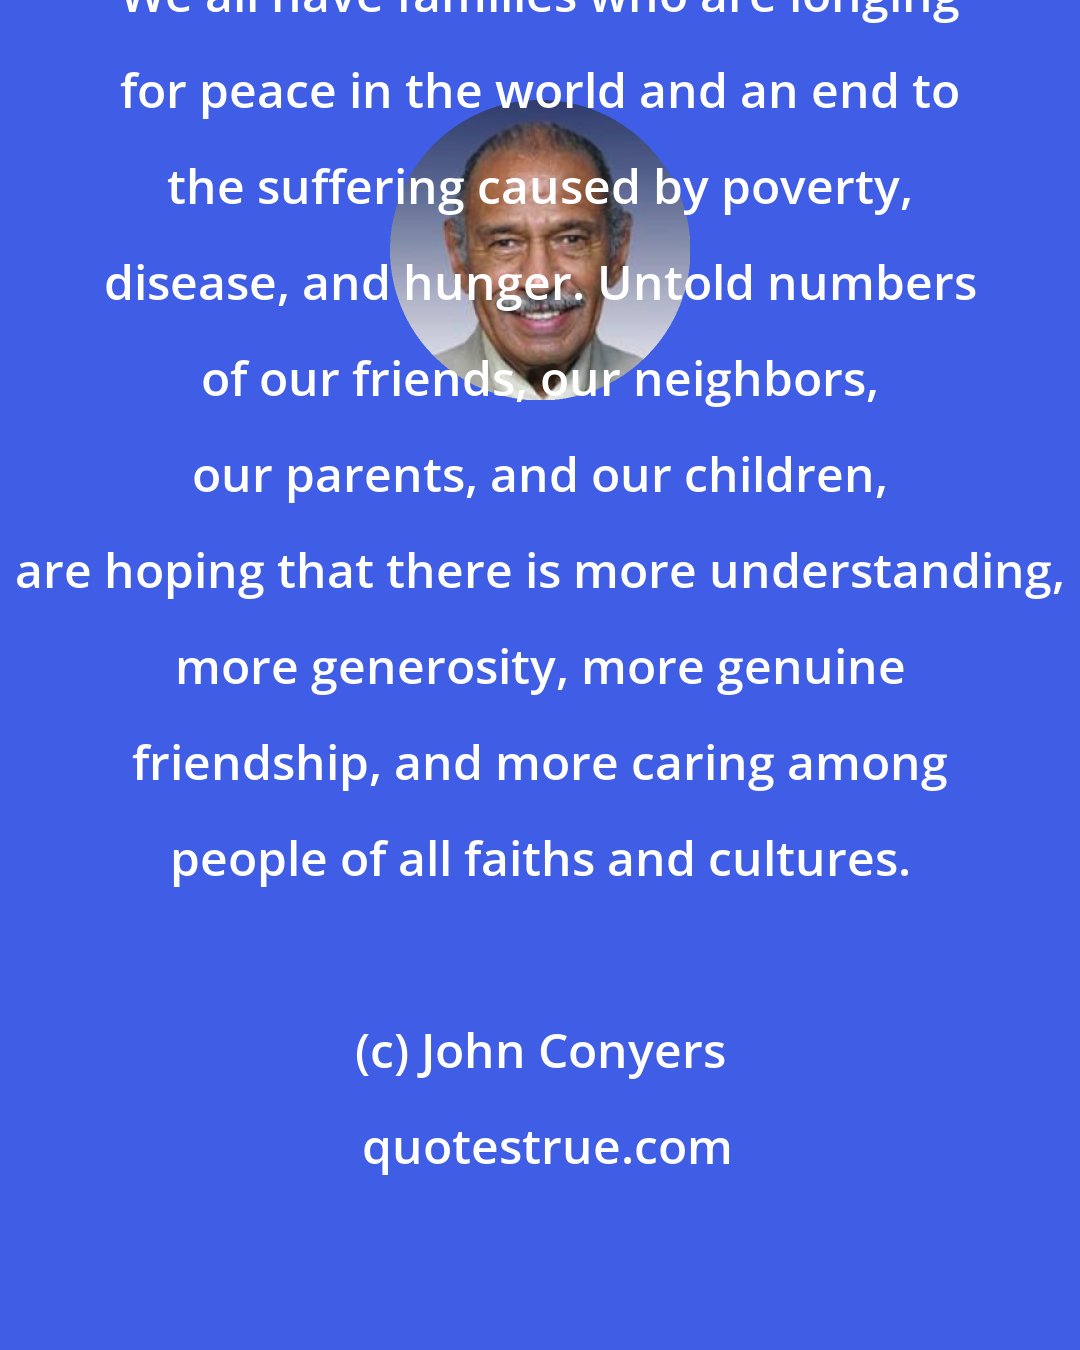 John Conyers: We all have families who are longing for peace in the world and an end to the suffering caused by poverty, disease, and hunger. Untold numbers of our friends, our neighbors, our parents, and our children, are hoping that there is more understanding, more generosity, more genuine friendship, and more caring among people of all faiths and cultures.